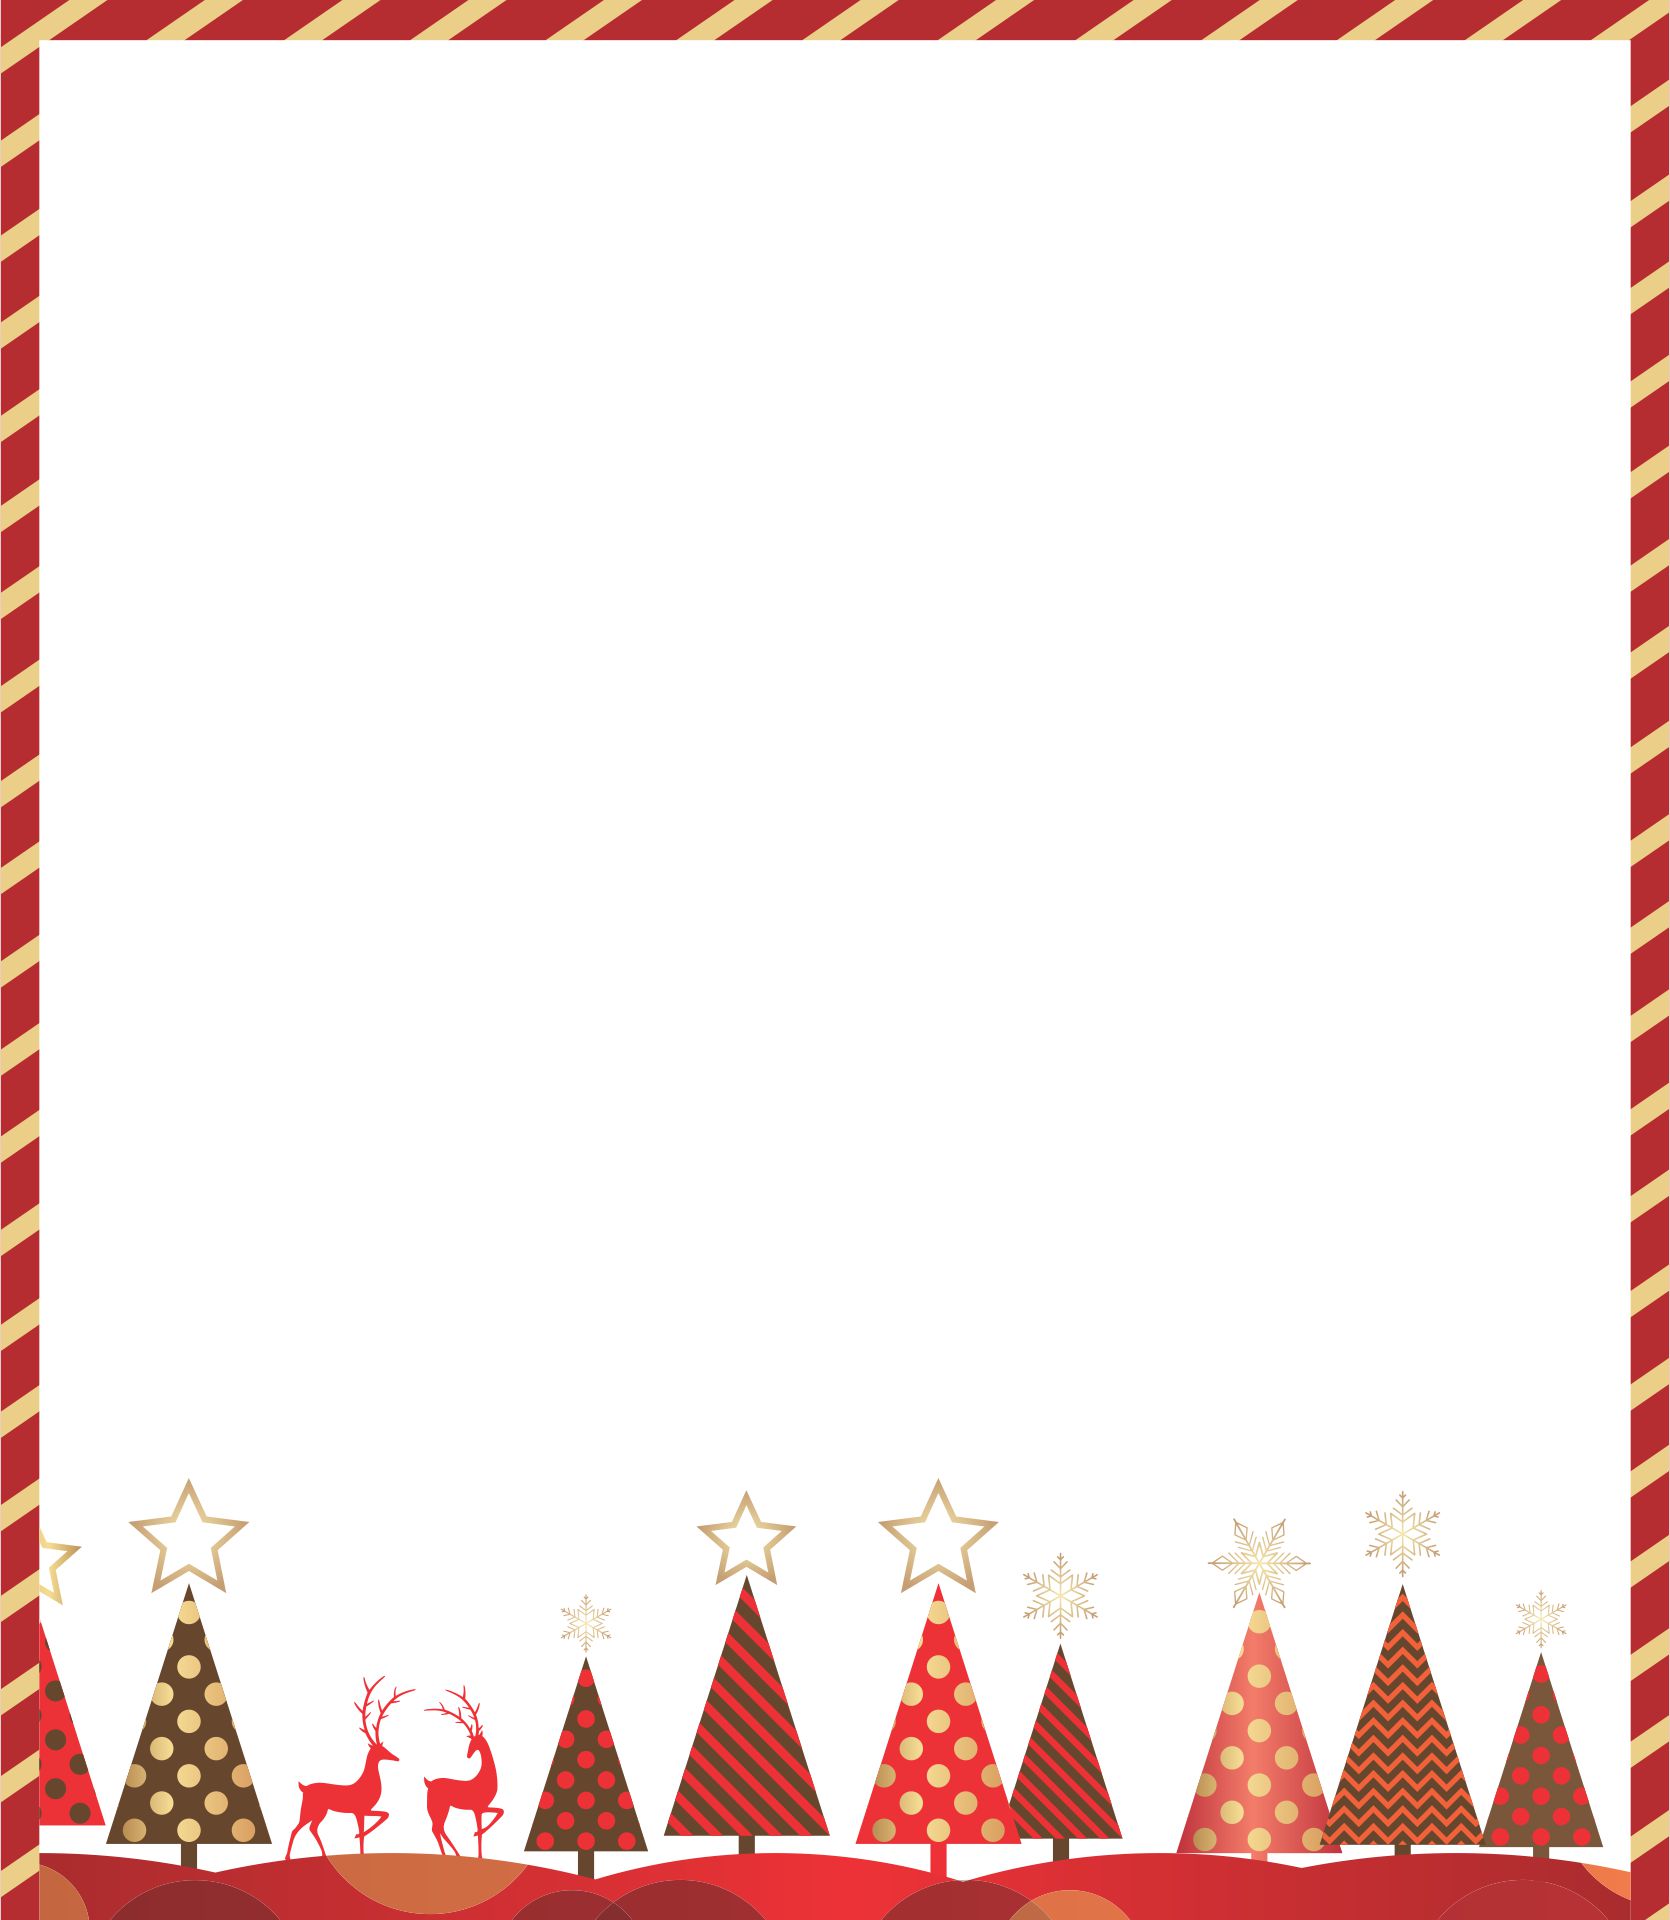 ms word holiday borders free